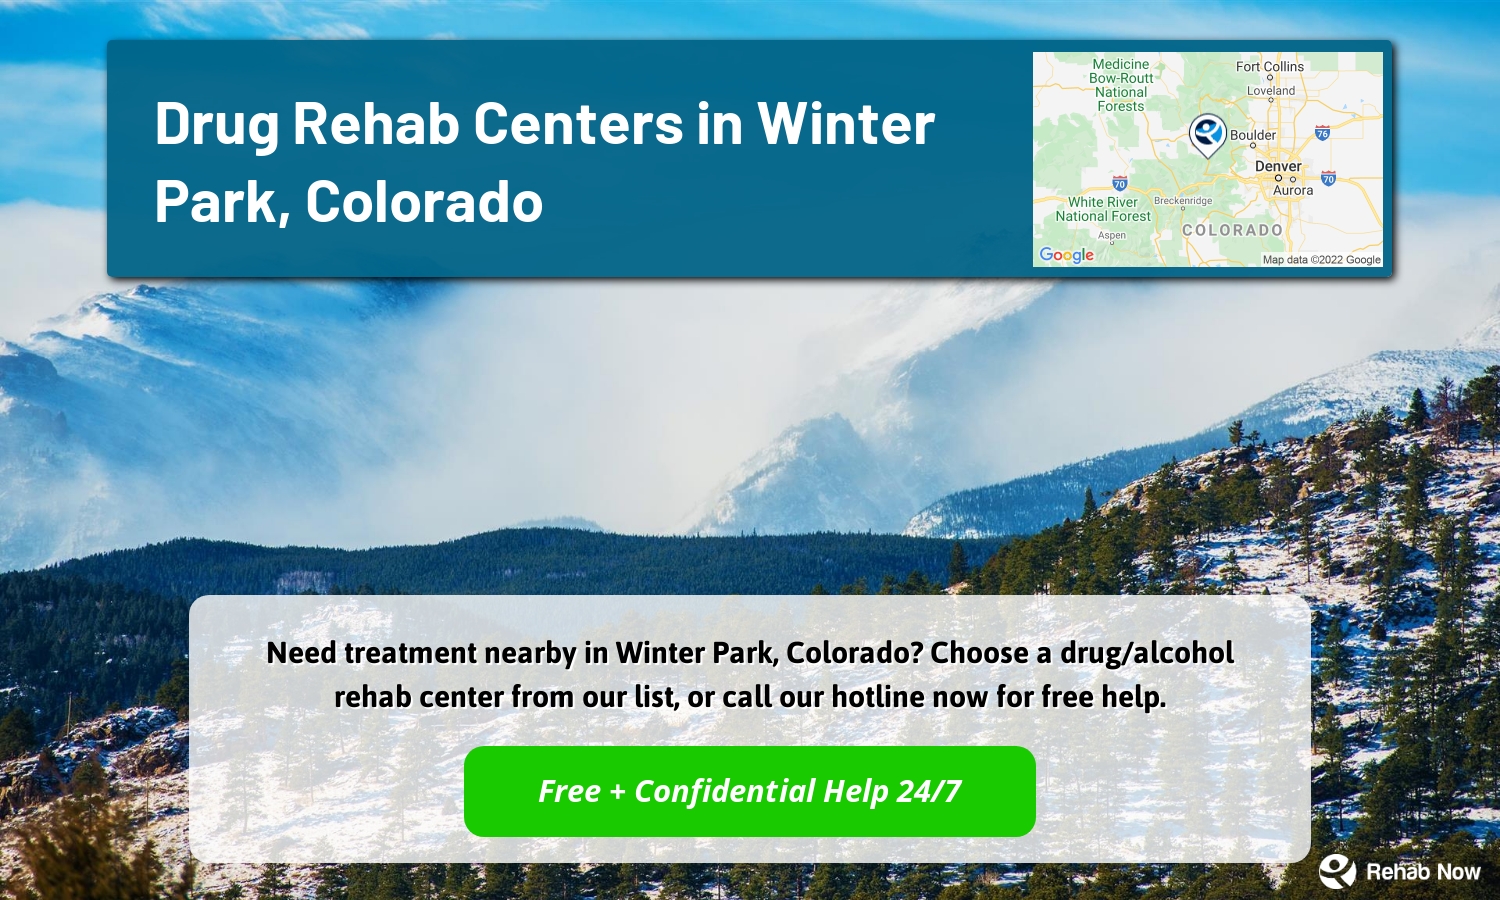 Need treatment nearby in Winter Park, Colorado? Choose a drug/alcohol rehab center from our list, or call our hotline now for free help.